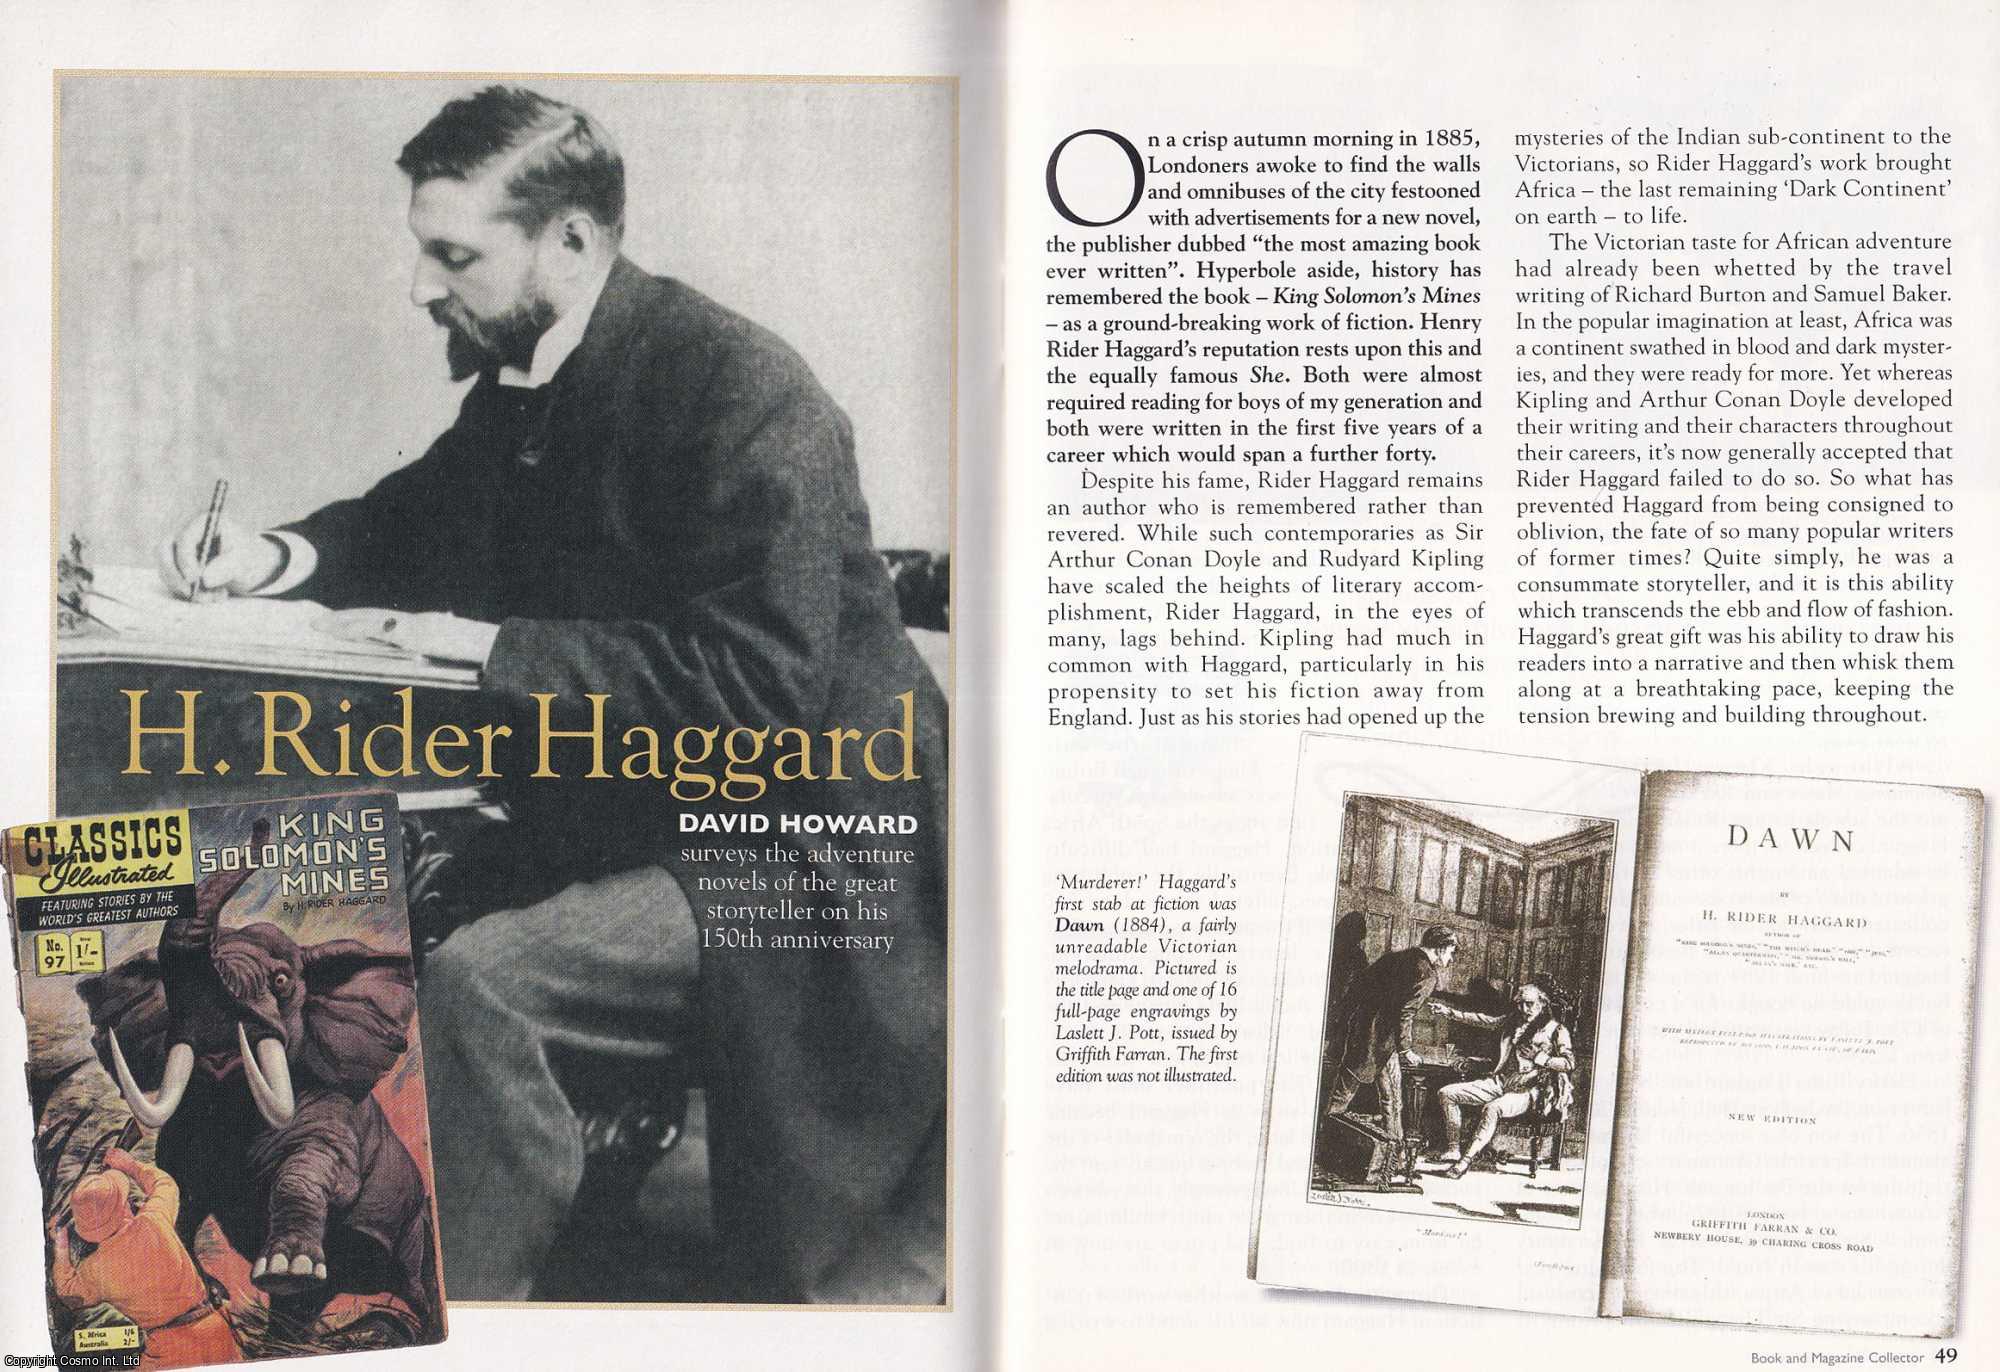 David Howard - H. Rider Haggard : The Adventure Novels. This is an original article separated from an issue of The Book & Magazine Collector publication, 2006.